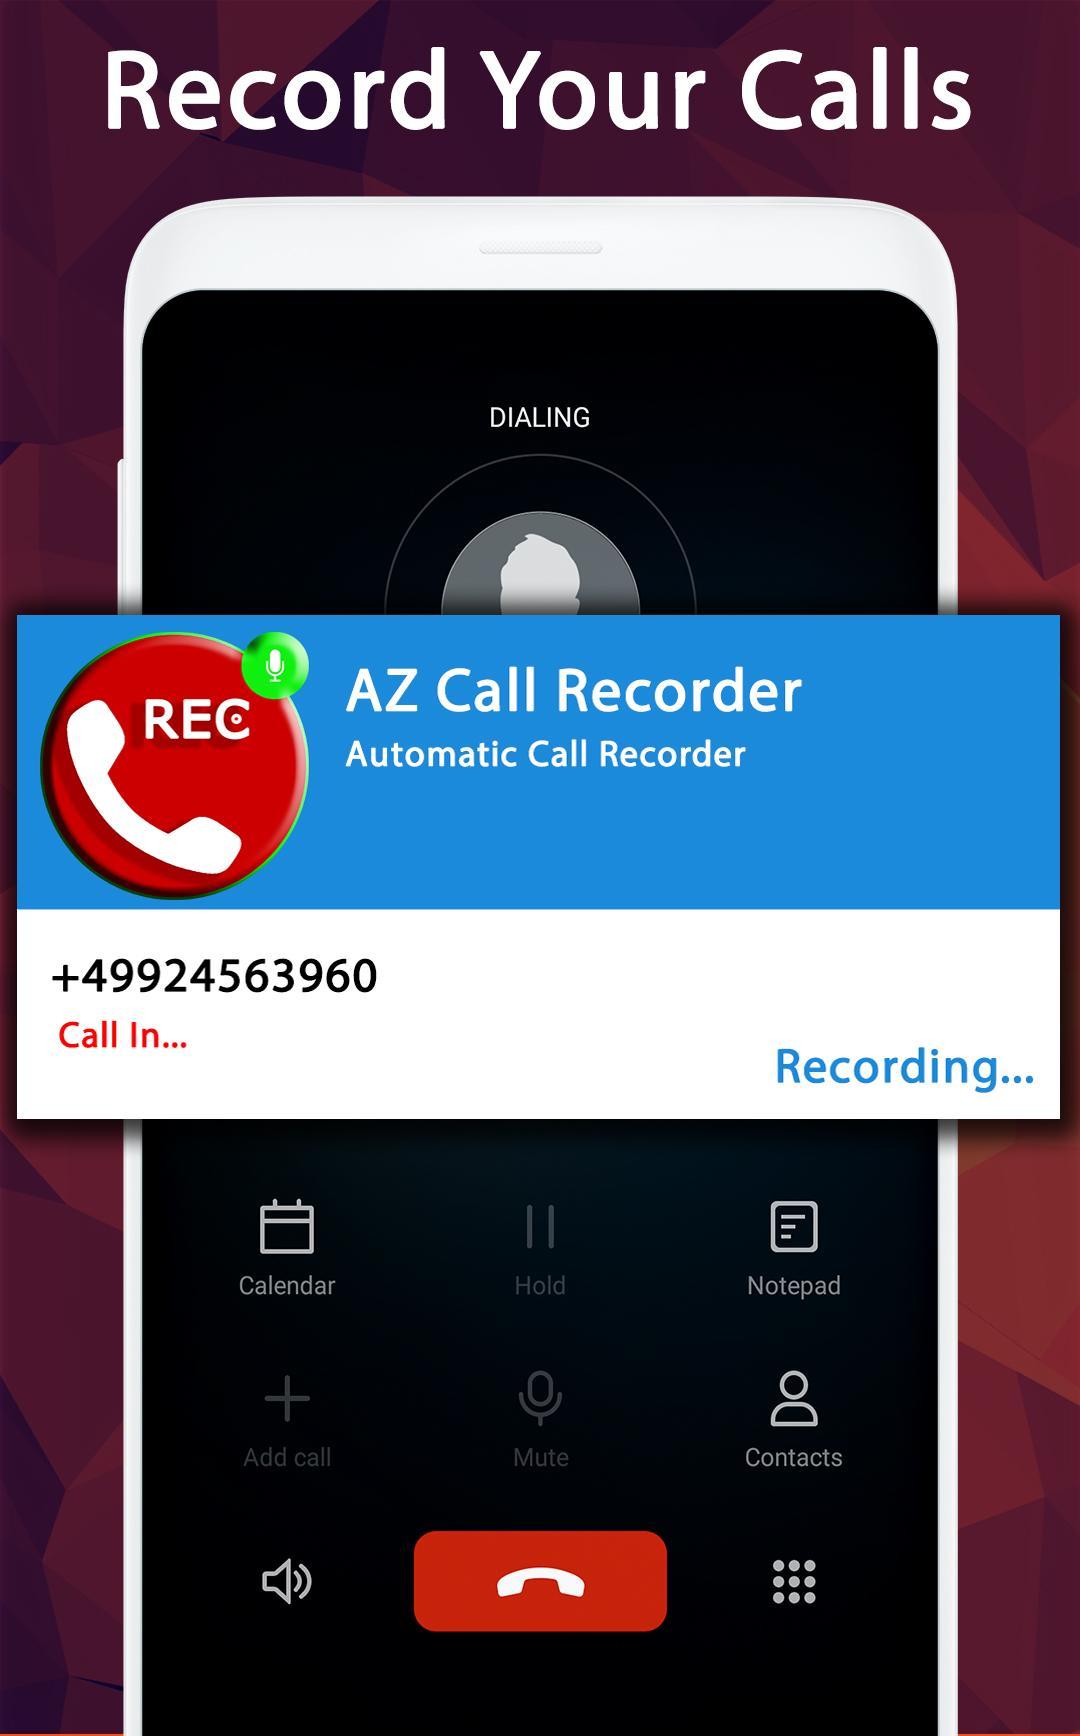 Huawei Mate 10 Call Recorder 2018 for Android - APK Download